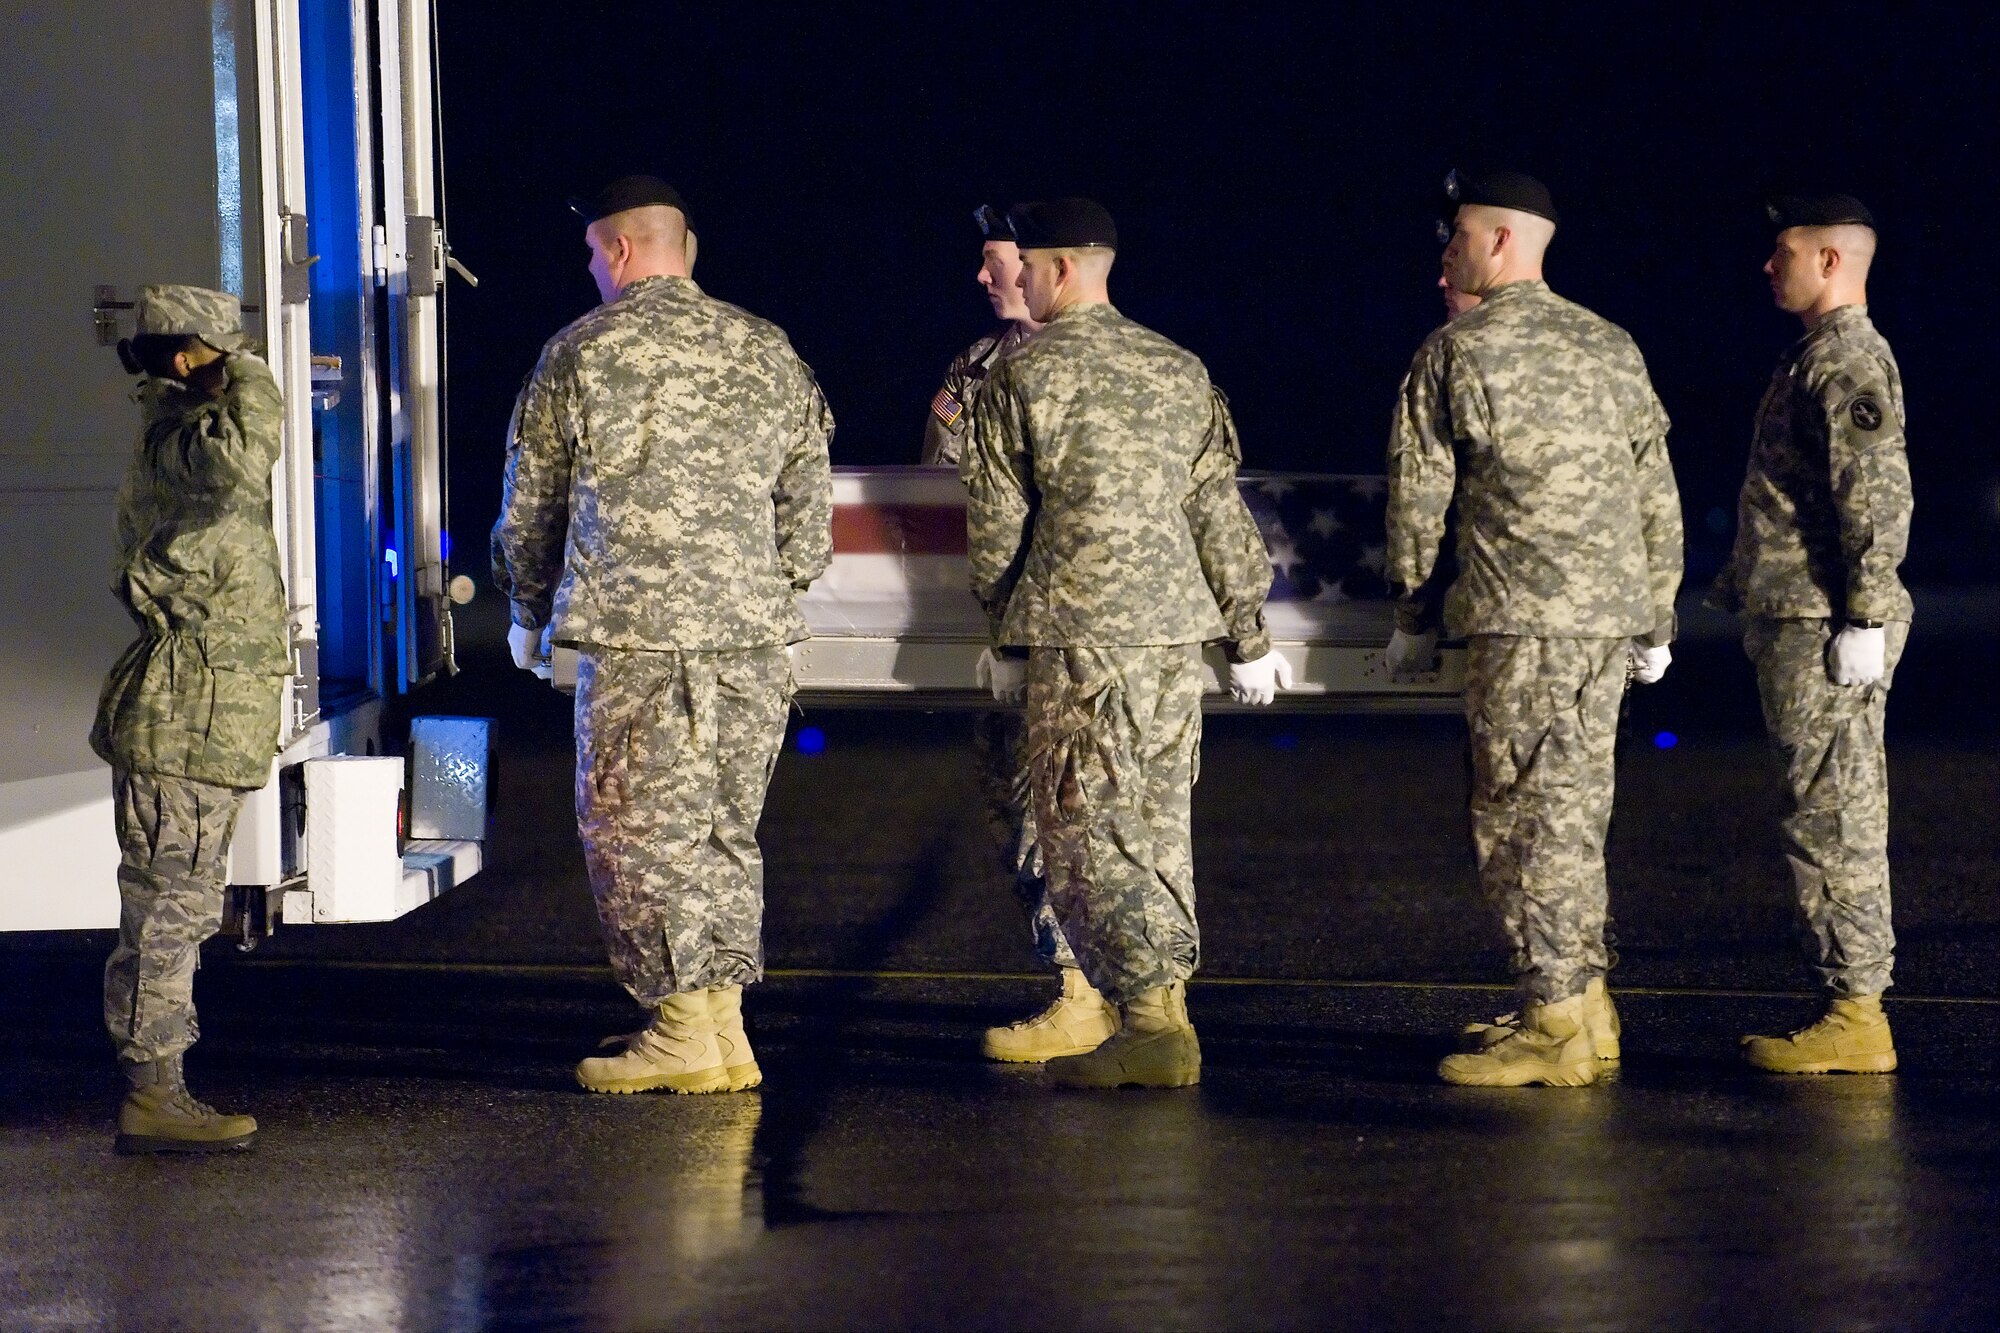 A U.S. Army carry team transfers the remains of Army Staff Sgt. Michael D. Cardenaz, of Corona, Calif., at Dover Air Force Base, Del., February 22. (U.S. Air Force photo/Roland Balik)